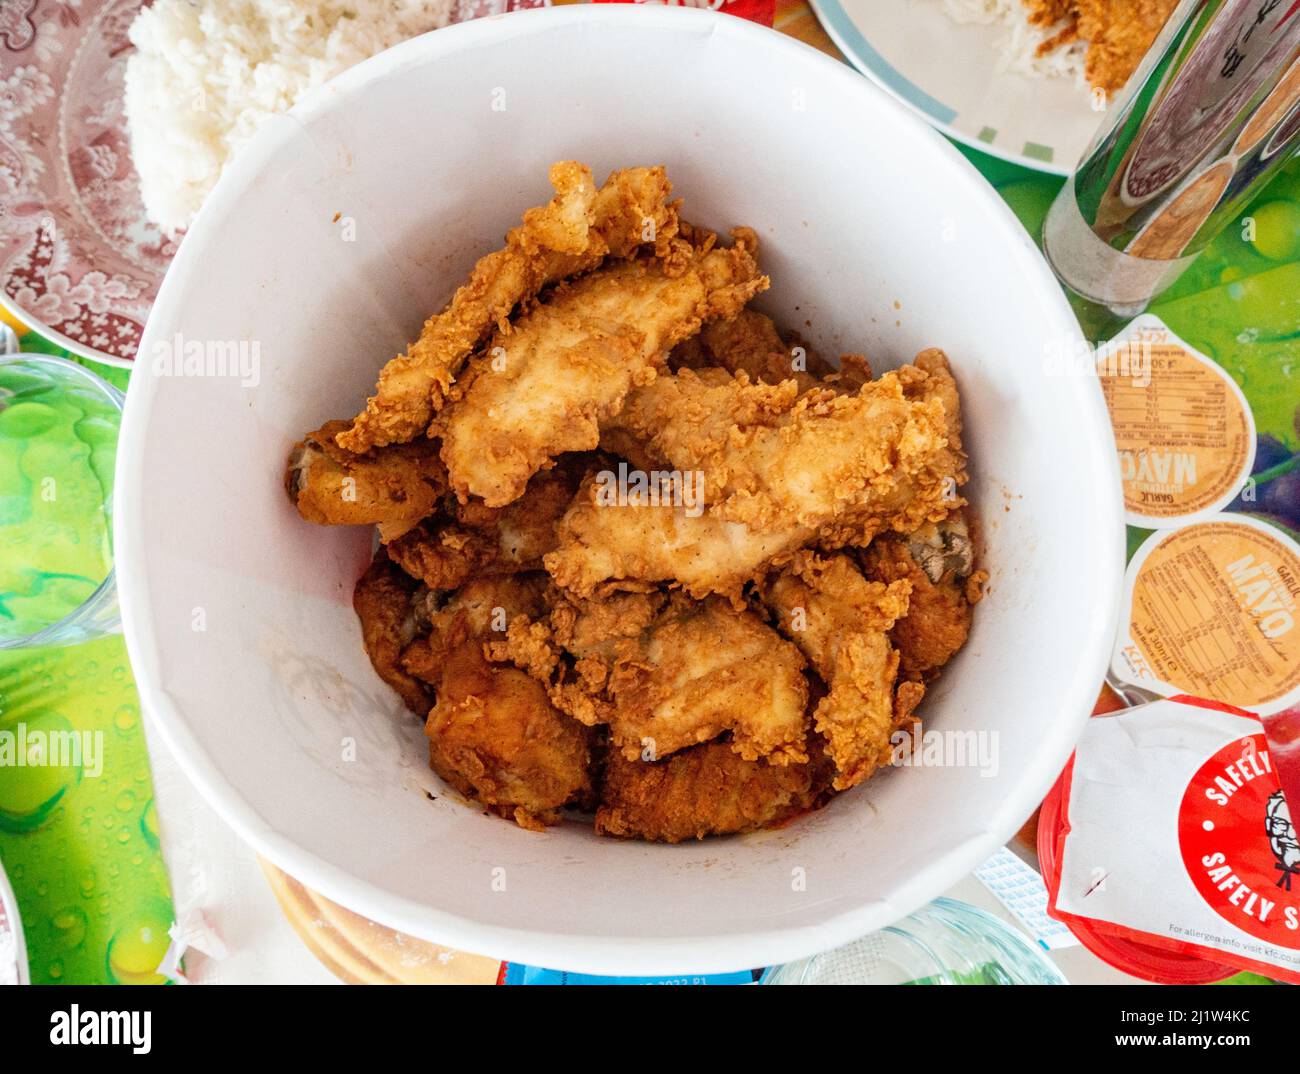 Pieces of fried chicken in a tub on a dining room table. Stock Photo